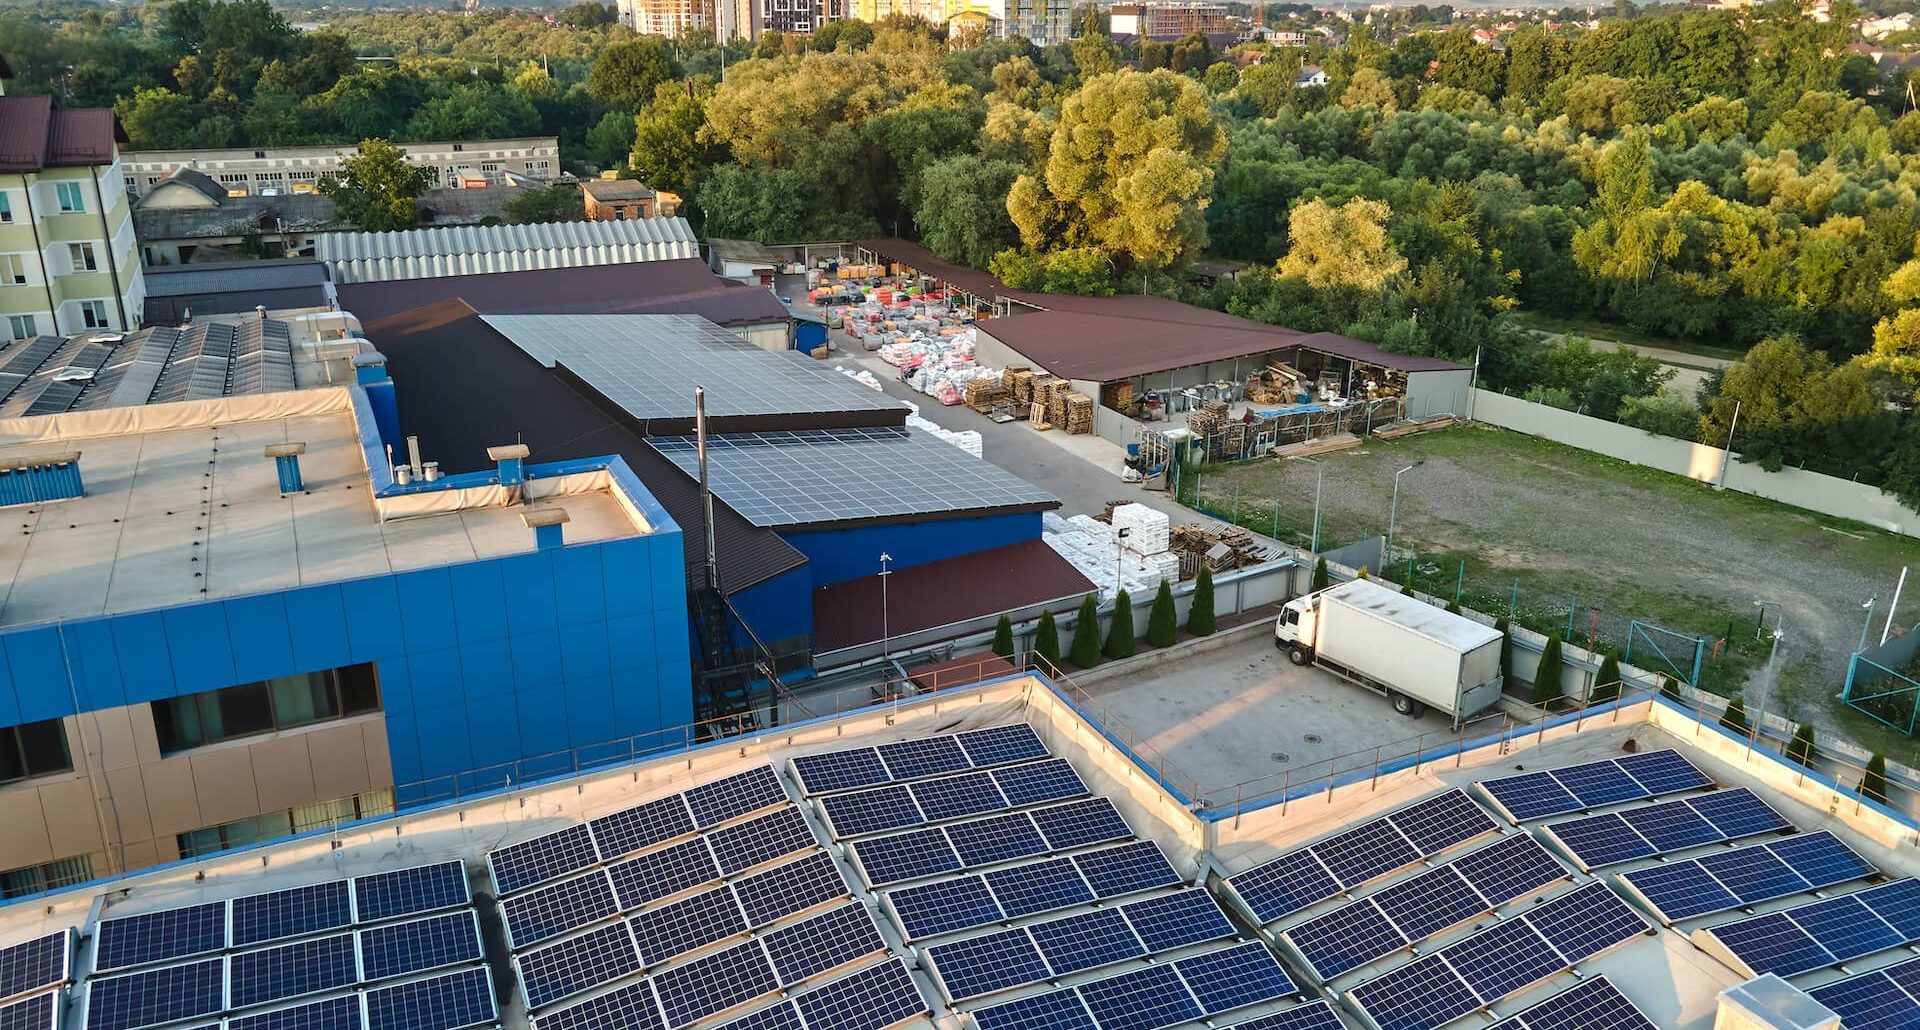 Aerial view of a commercial solar facility